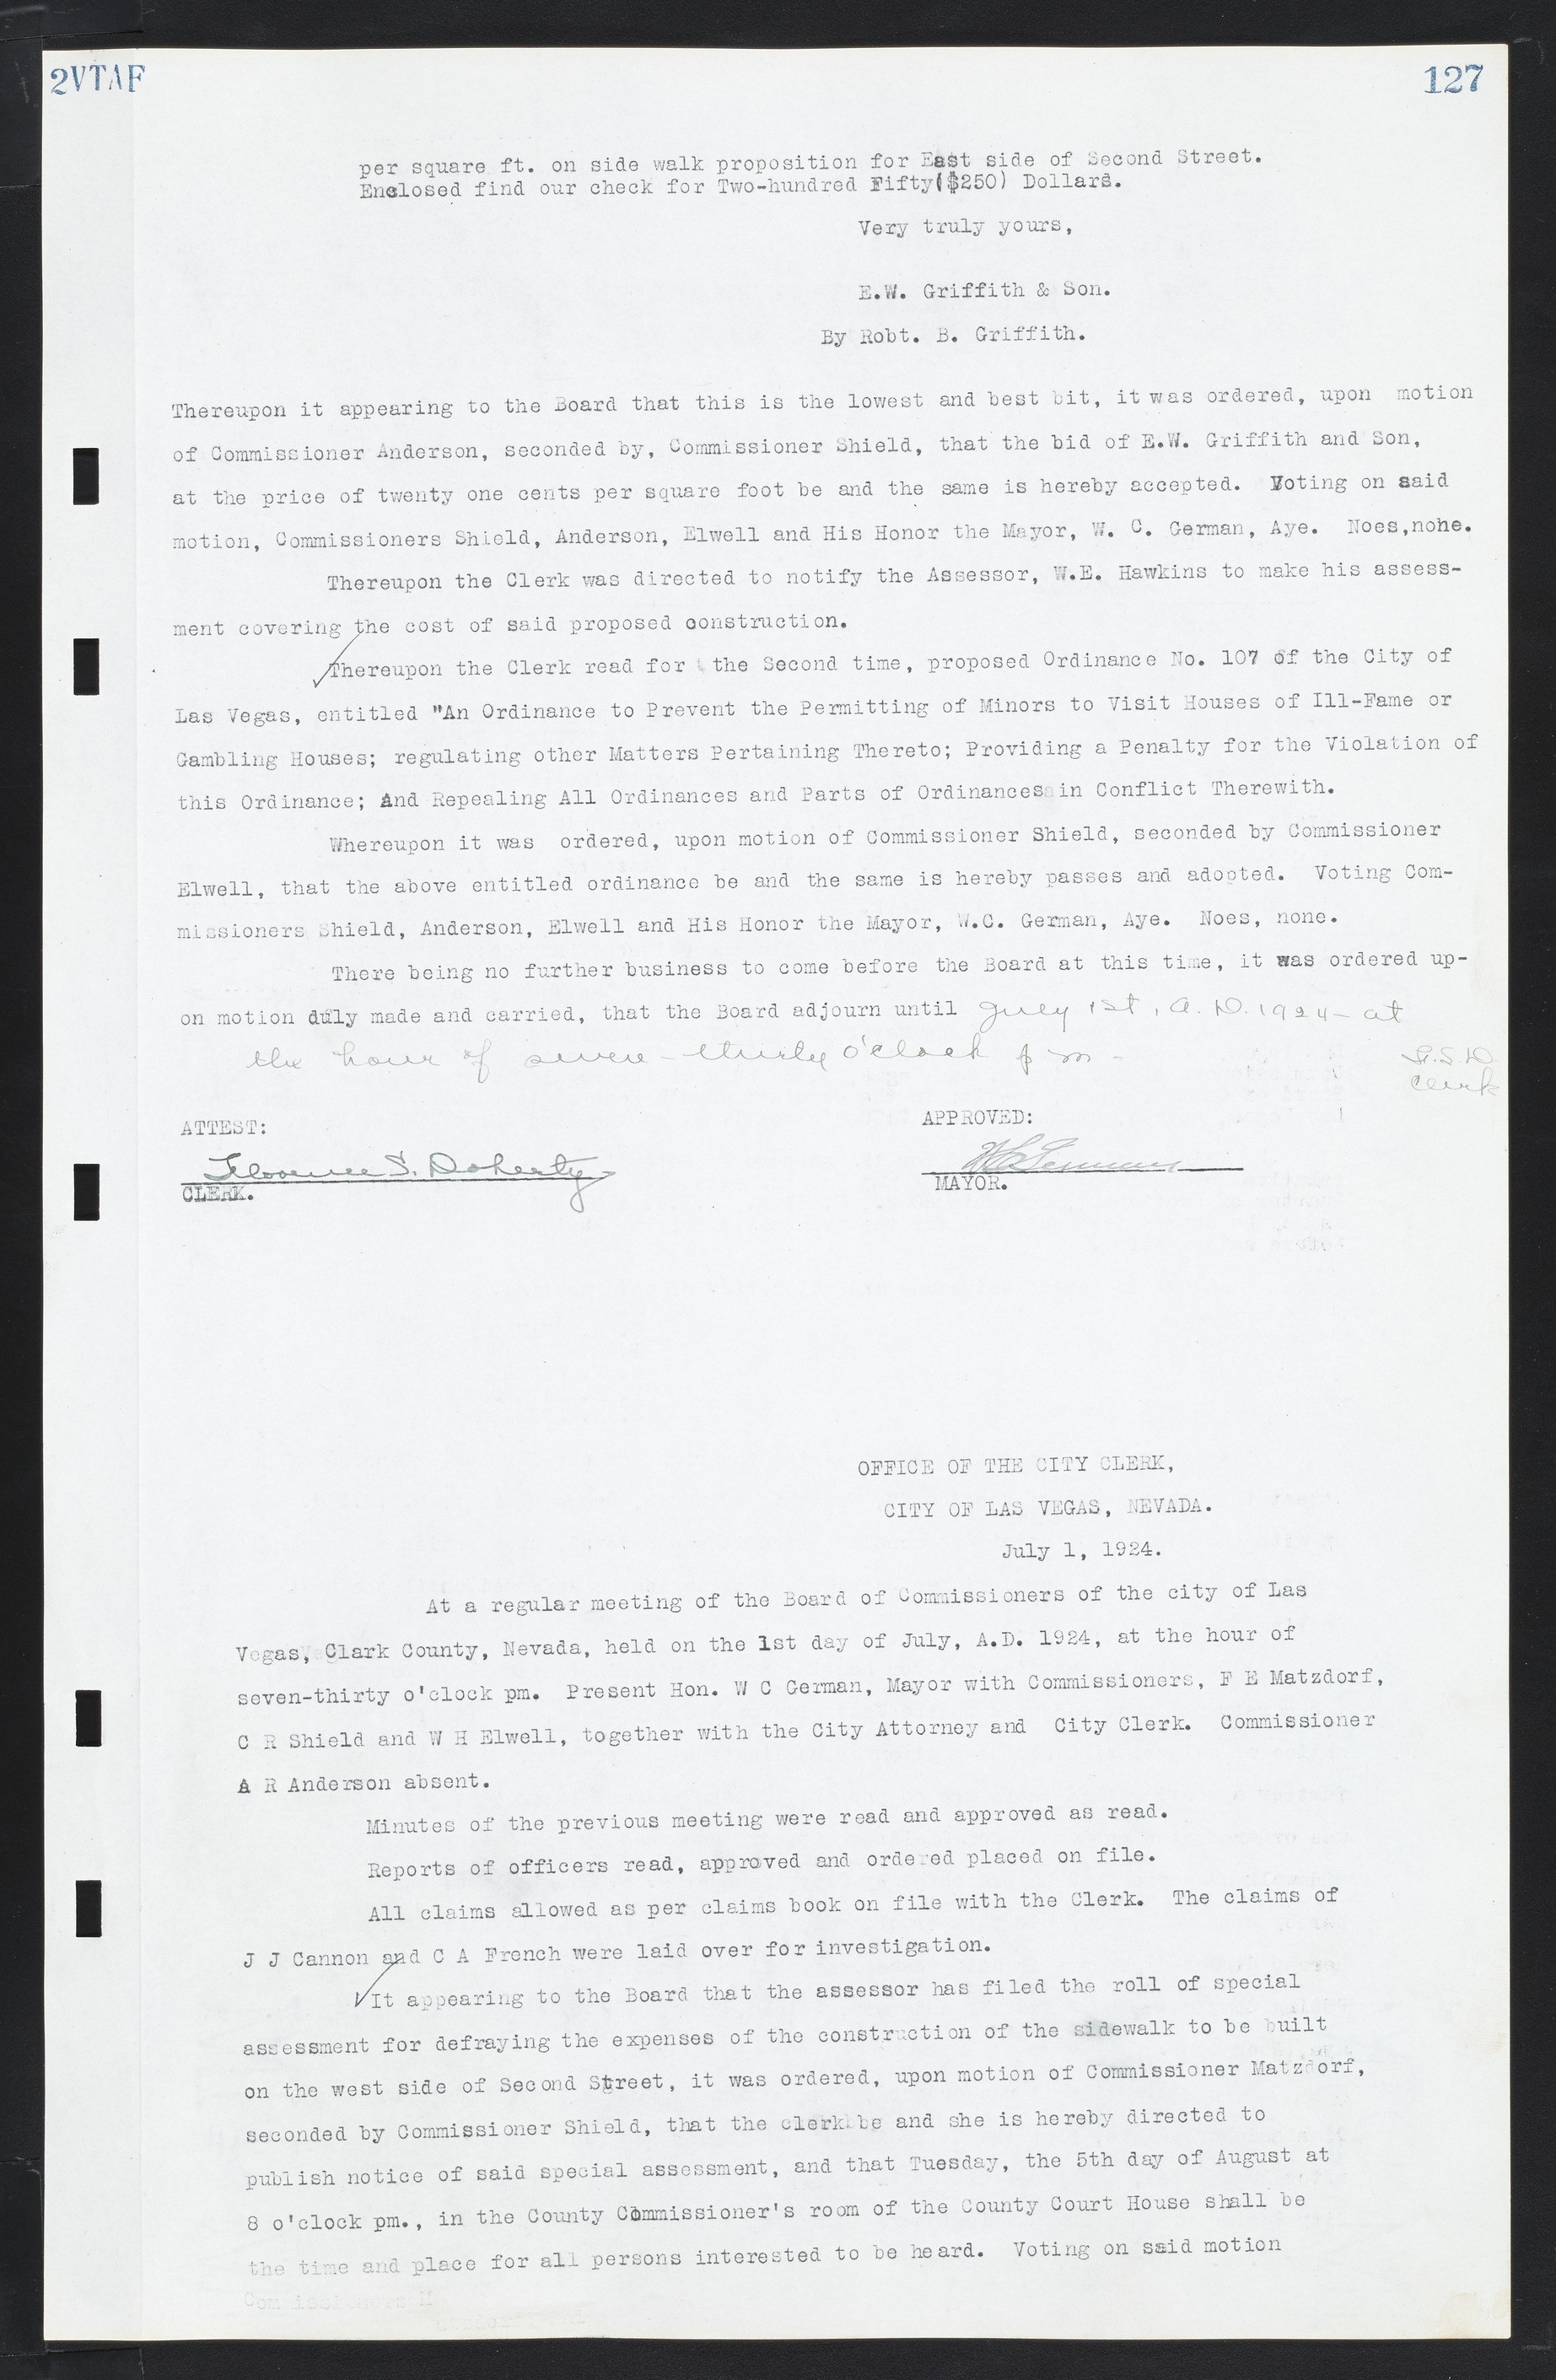 Las Vegas City Commission Minutes, March 1, 1922 to May 10, 1929, lvc000002-134